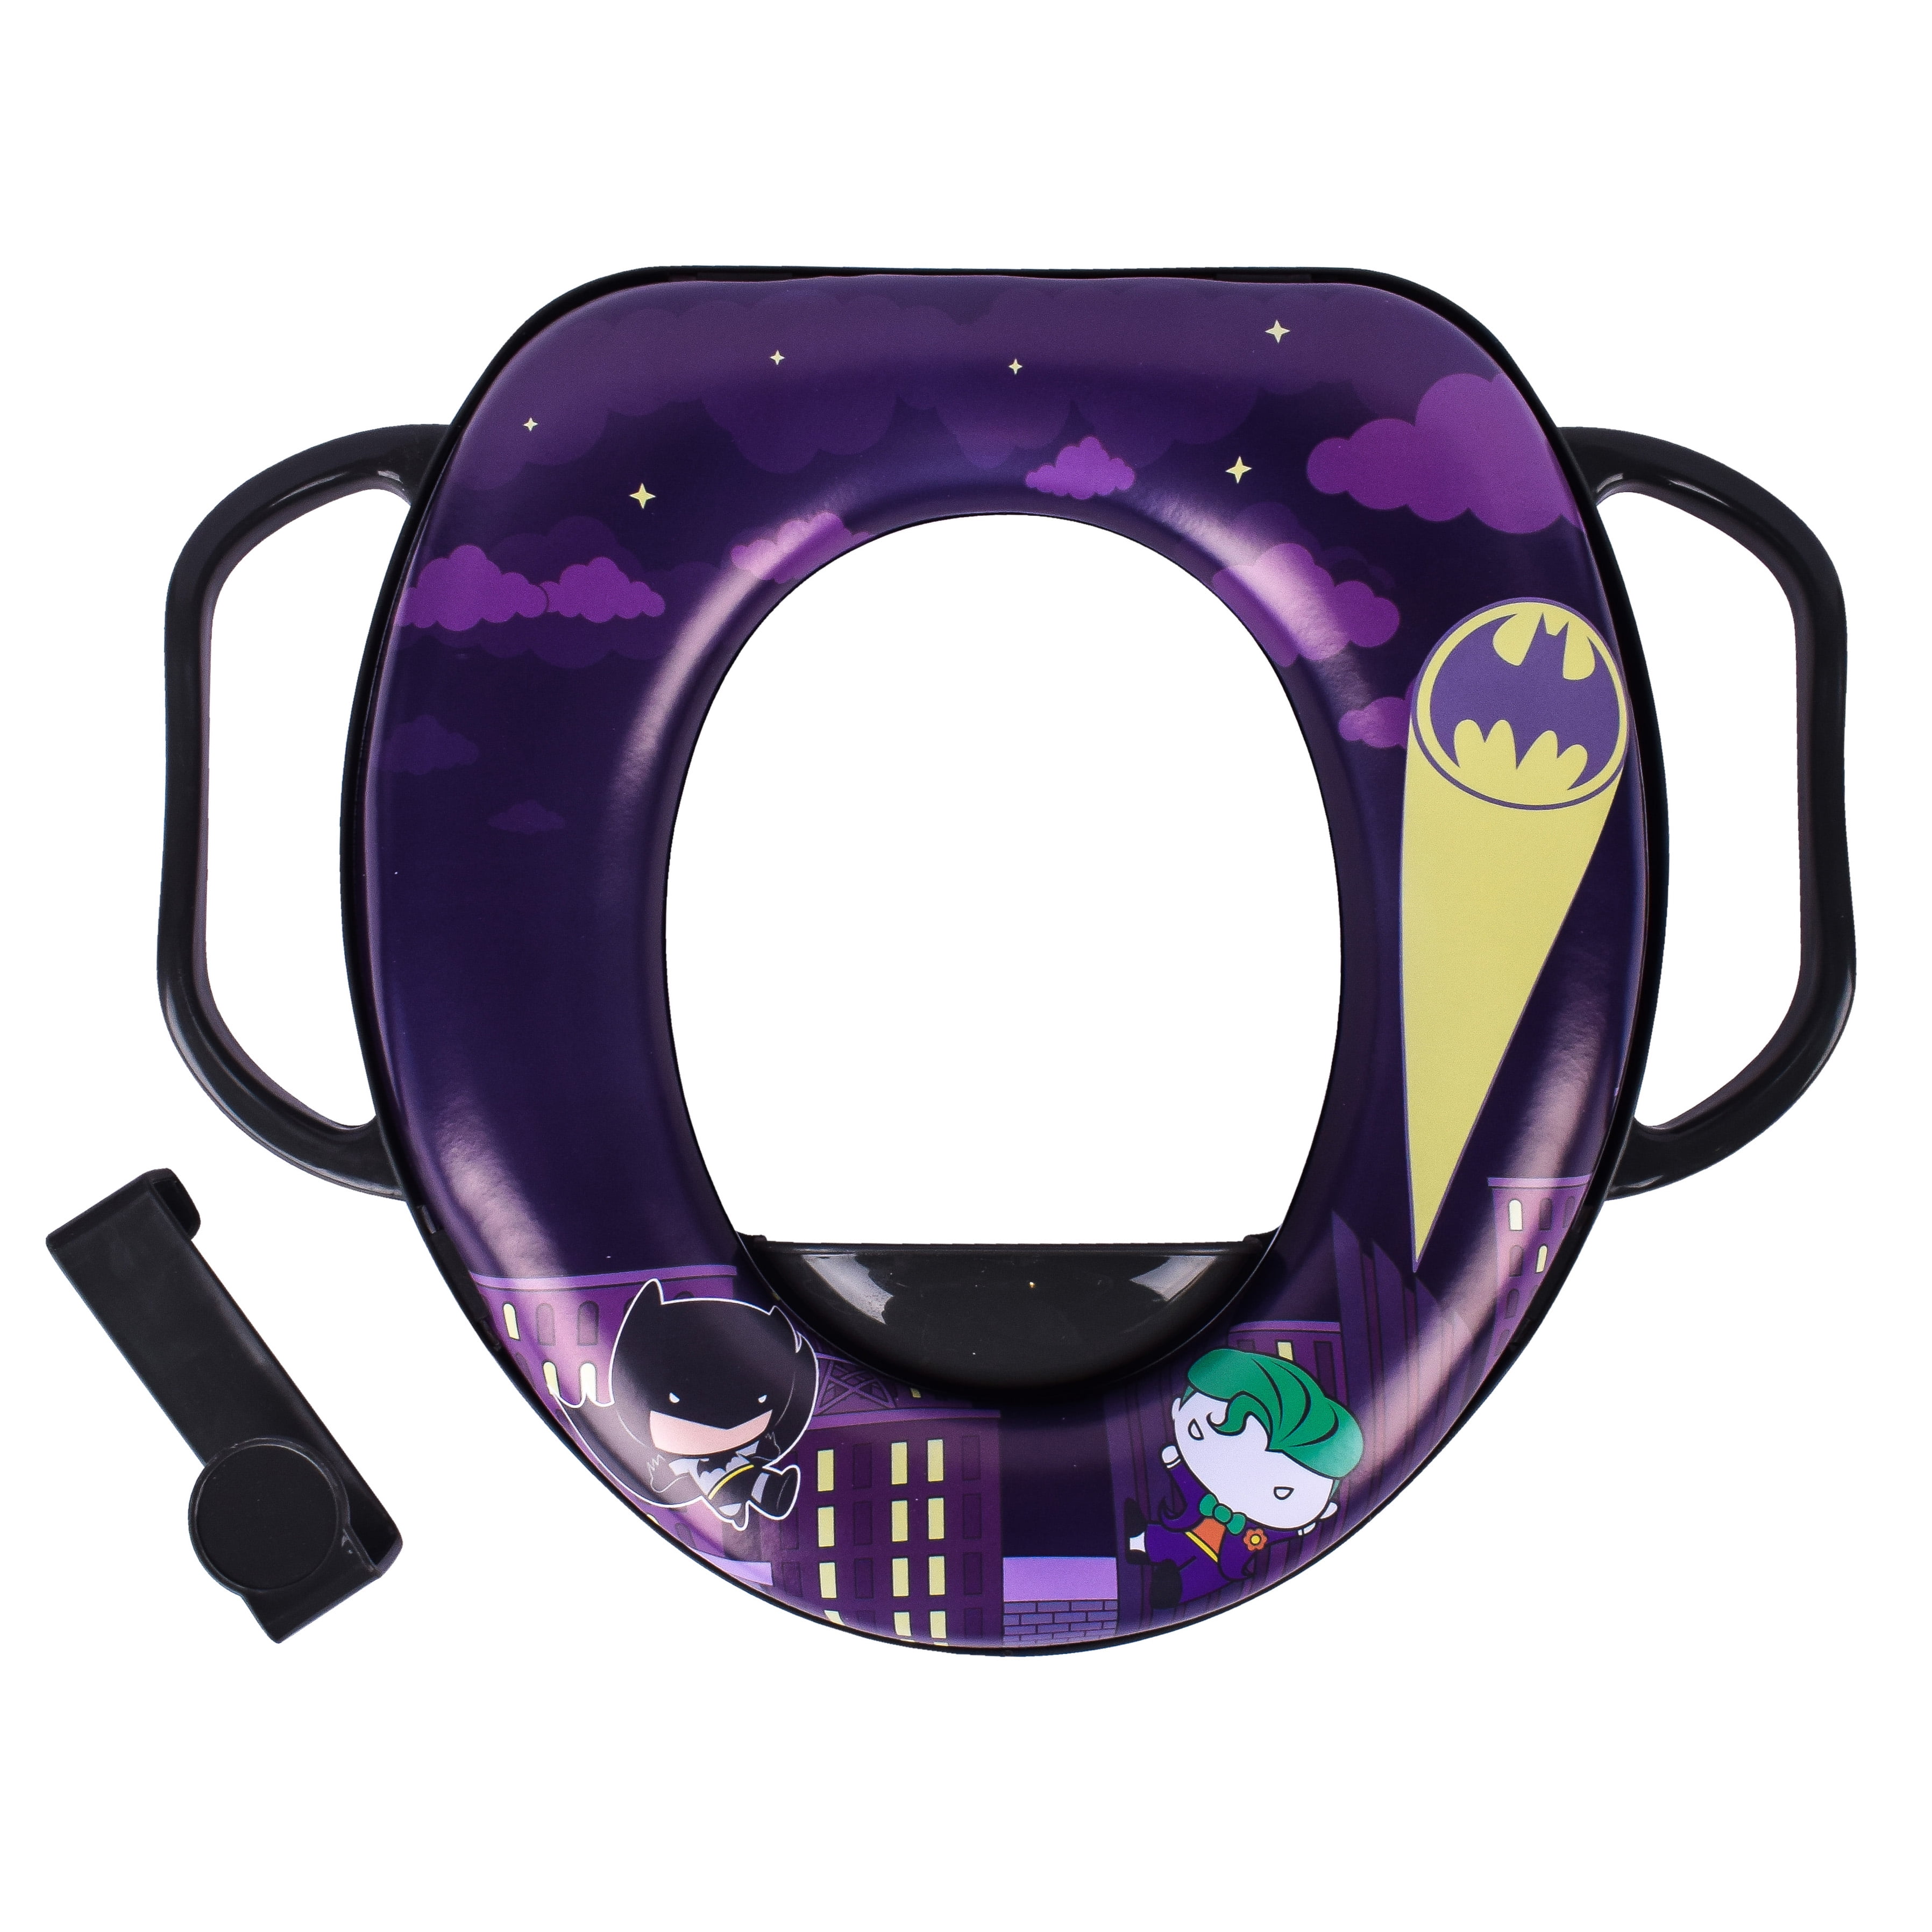 DC Comics Batman Soft Potty Training Seat with Storage Hook and Handles, Toddlers 12 Months and Older, Unisex